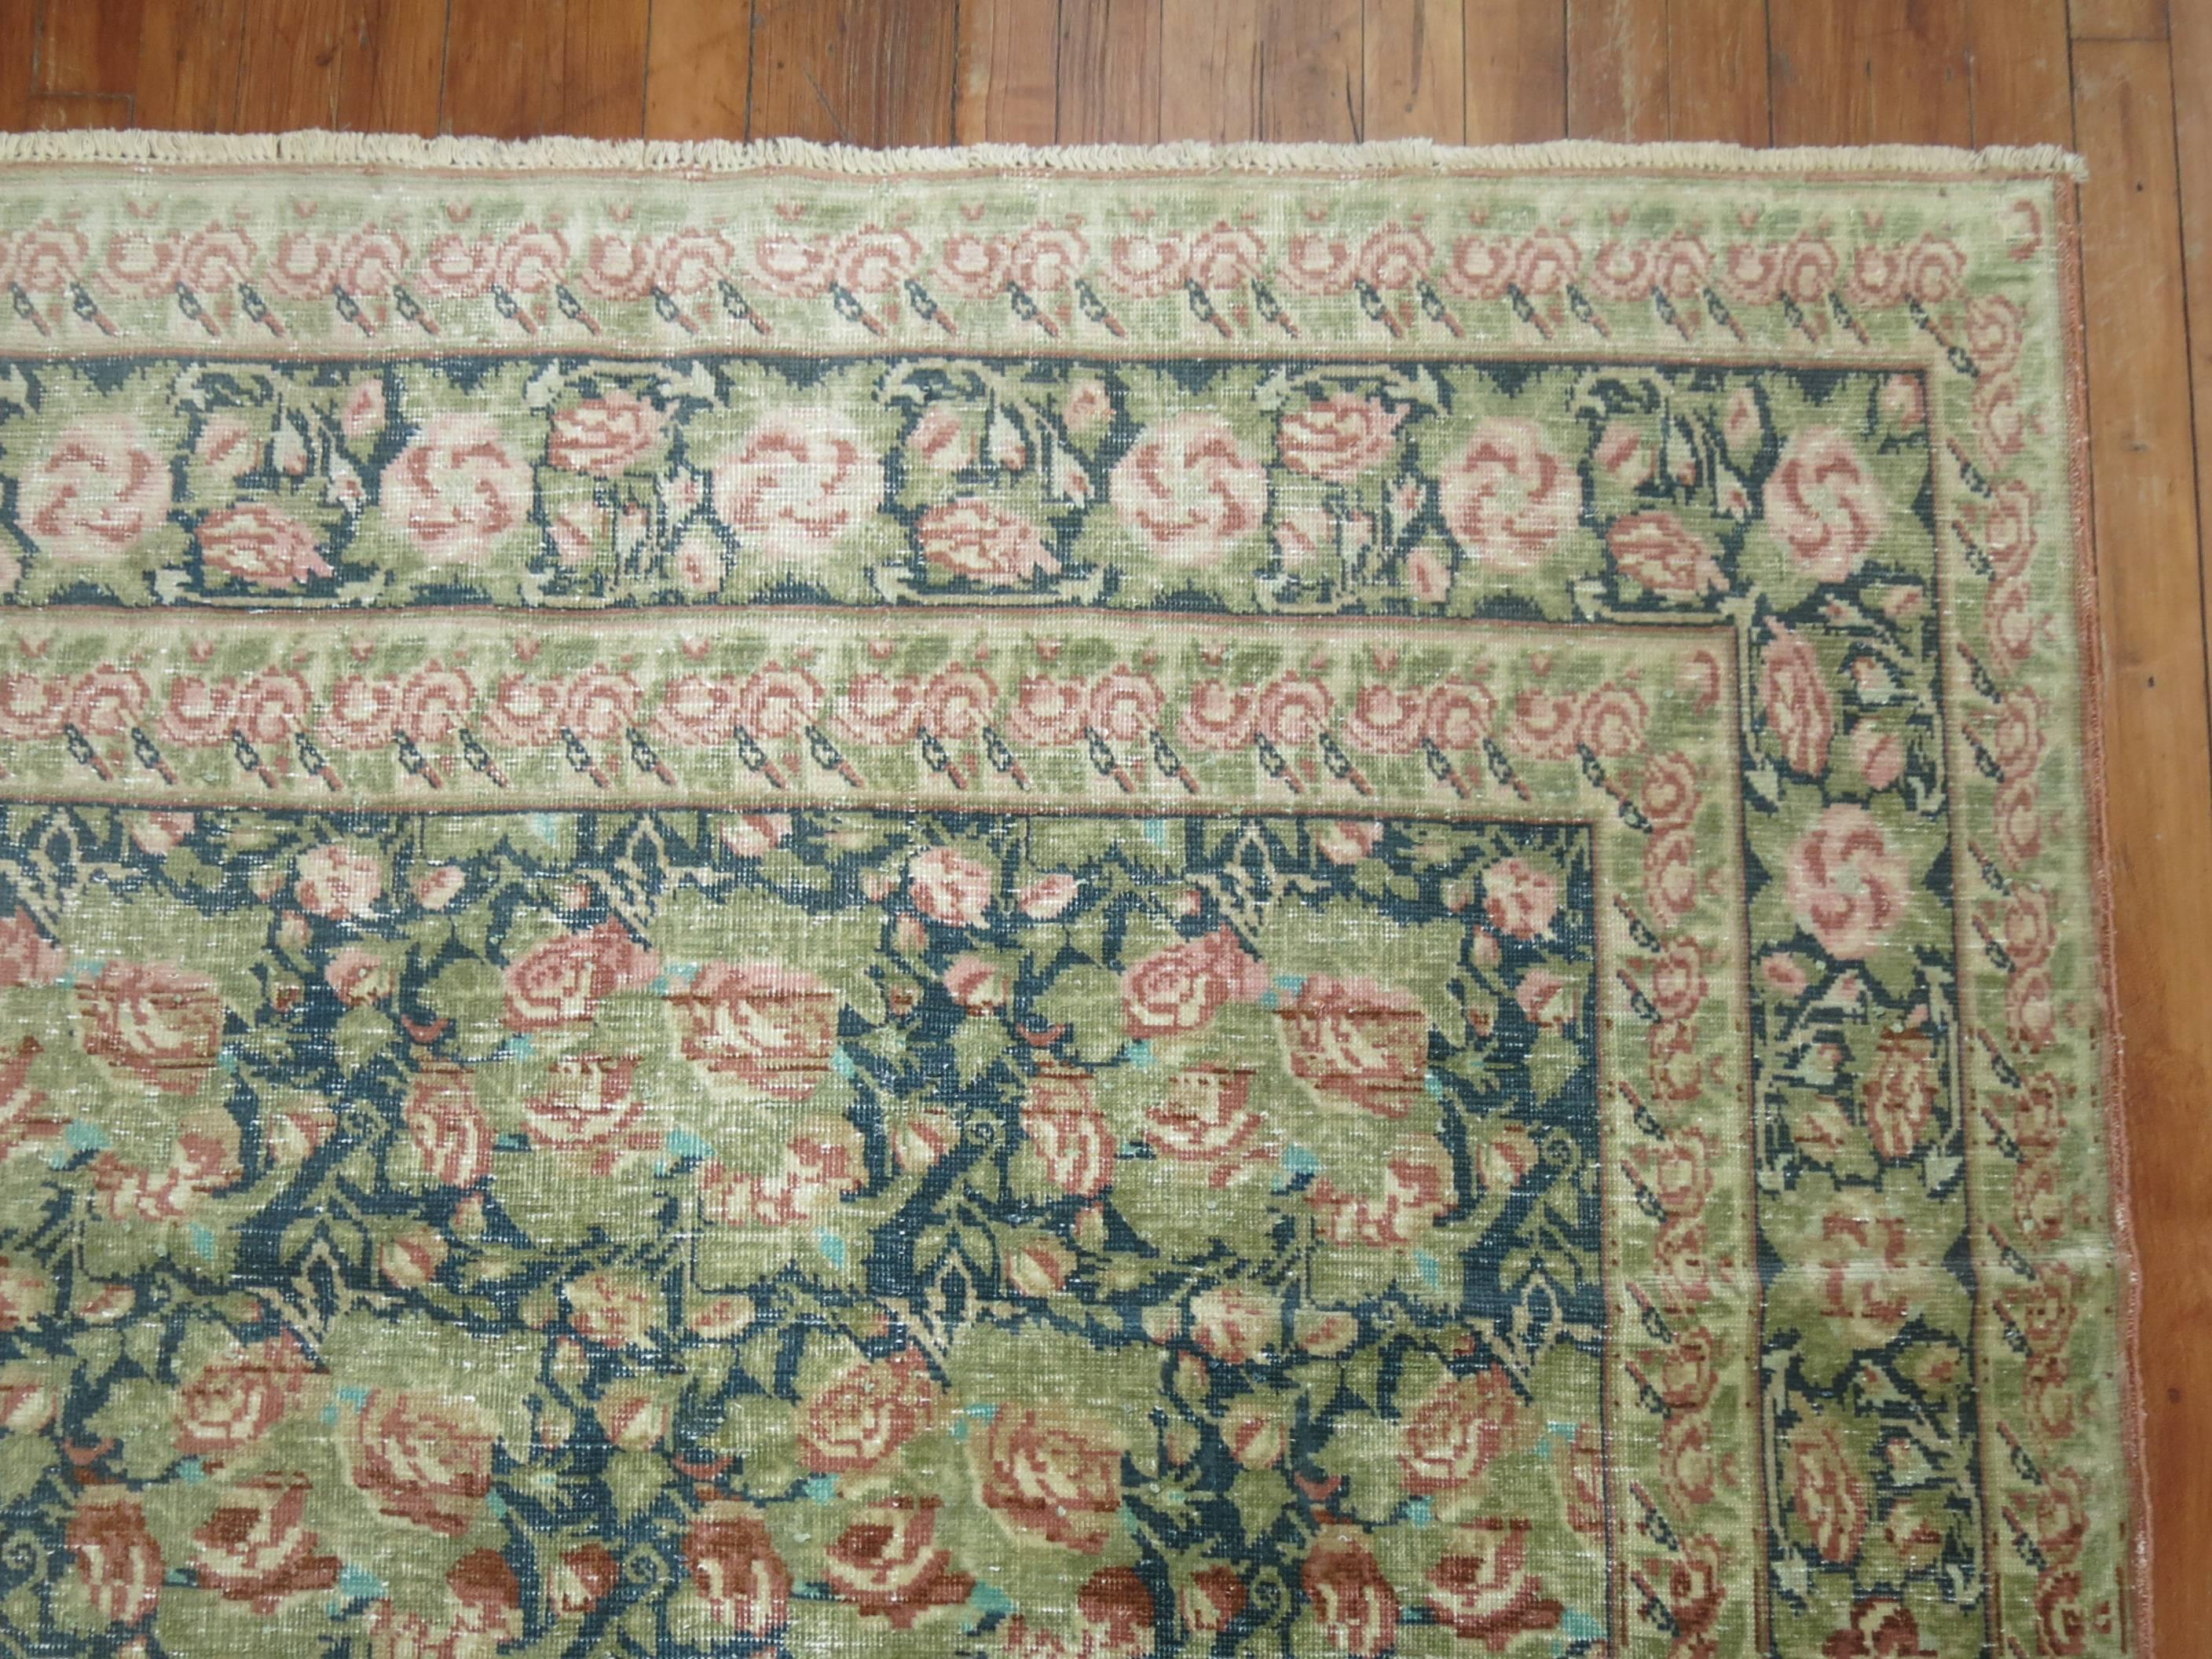 Worn mid-20th century European carpet with a matching floral field and motif in dominant green and pink shades.

Measures: 9'10'' x 13'.